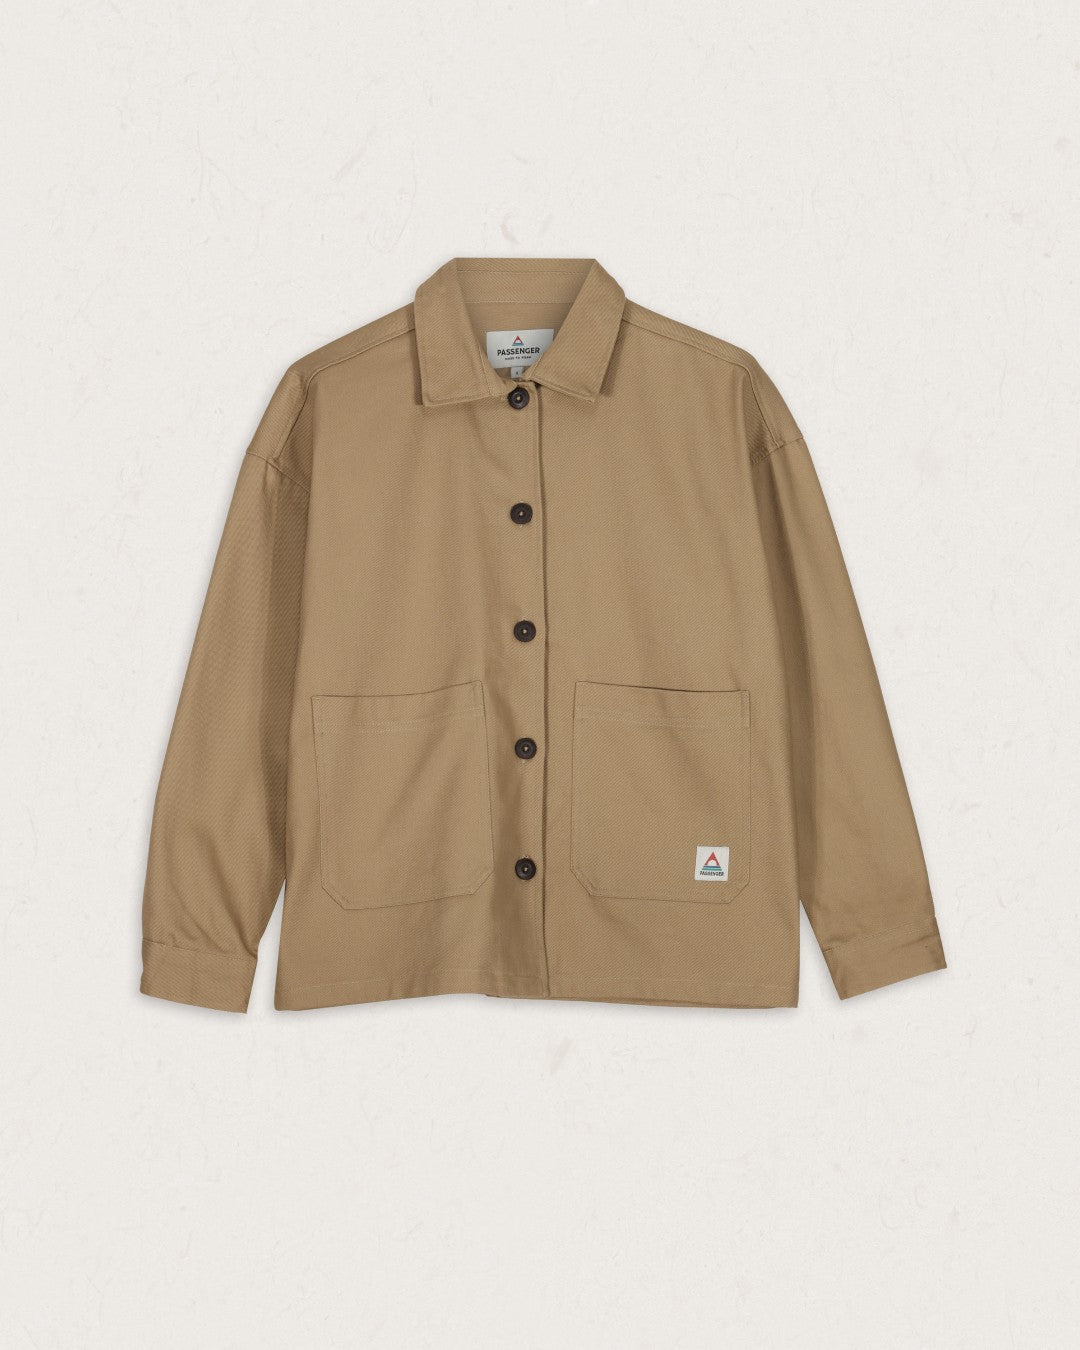 Forrest Organic Cotton Oversized Twill Overshirt - Biscuit